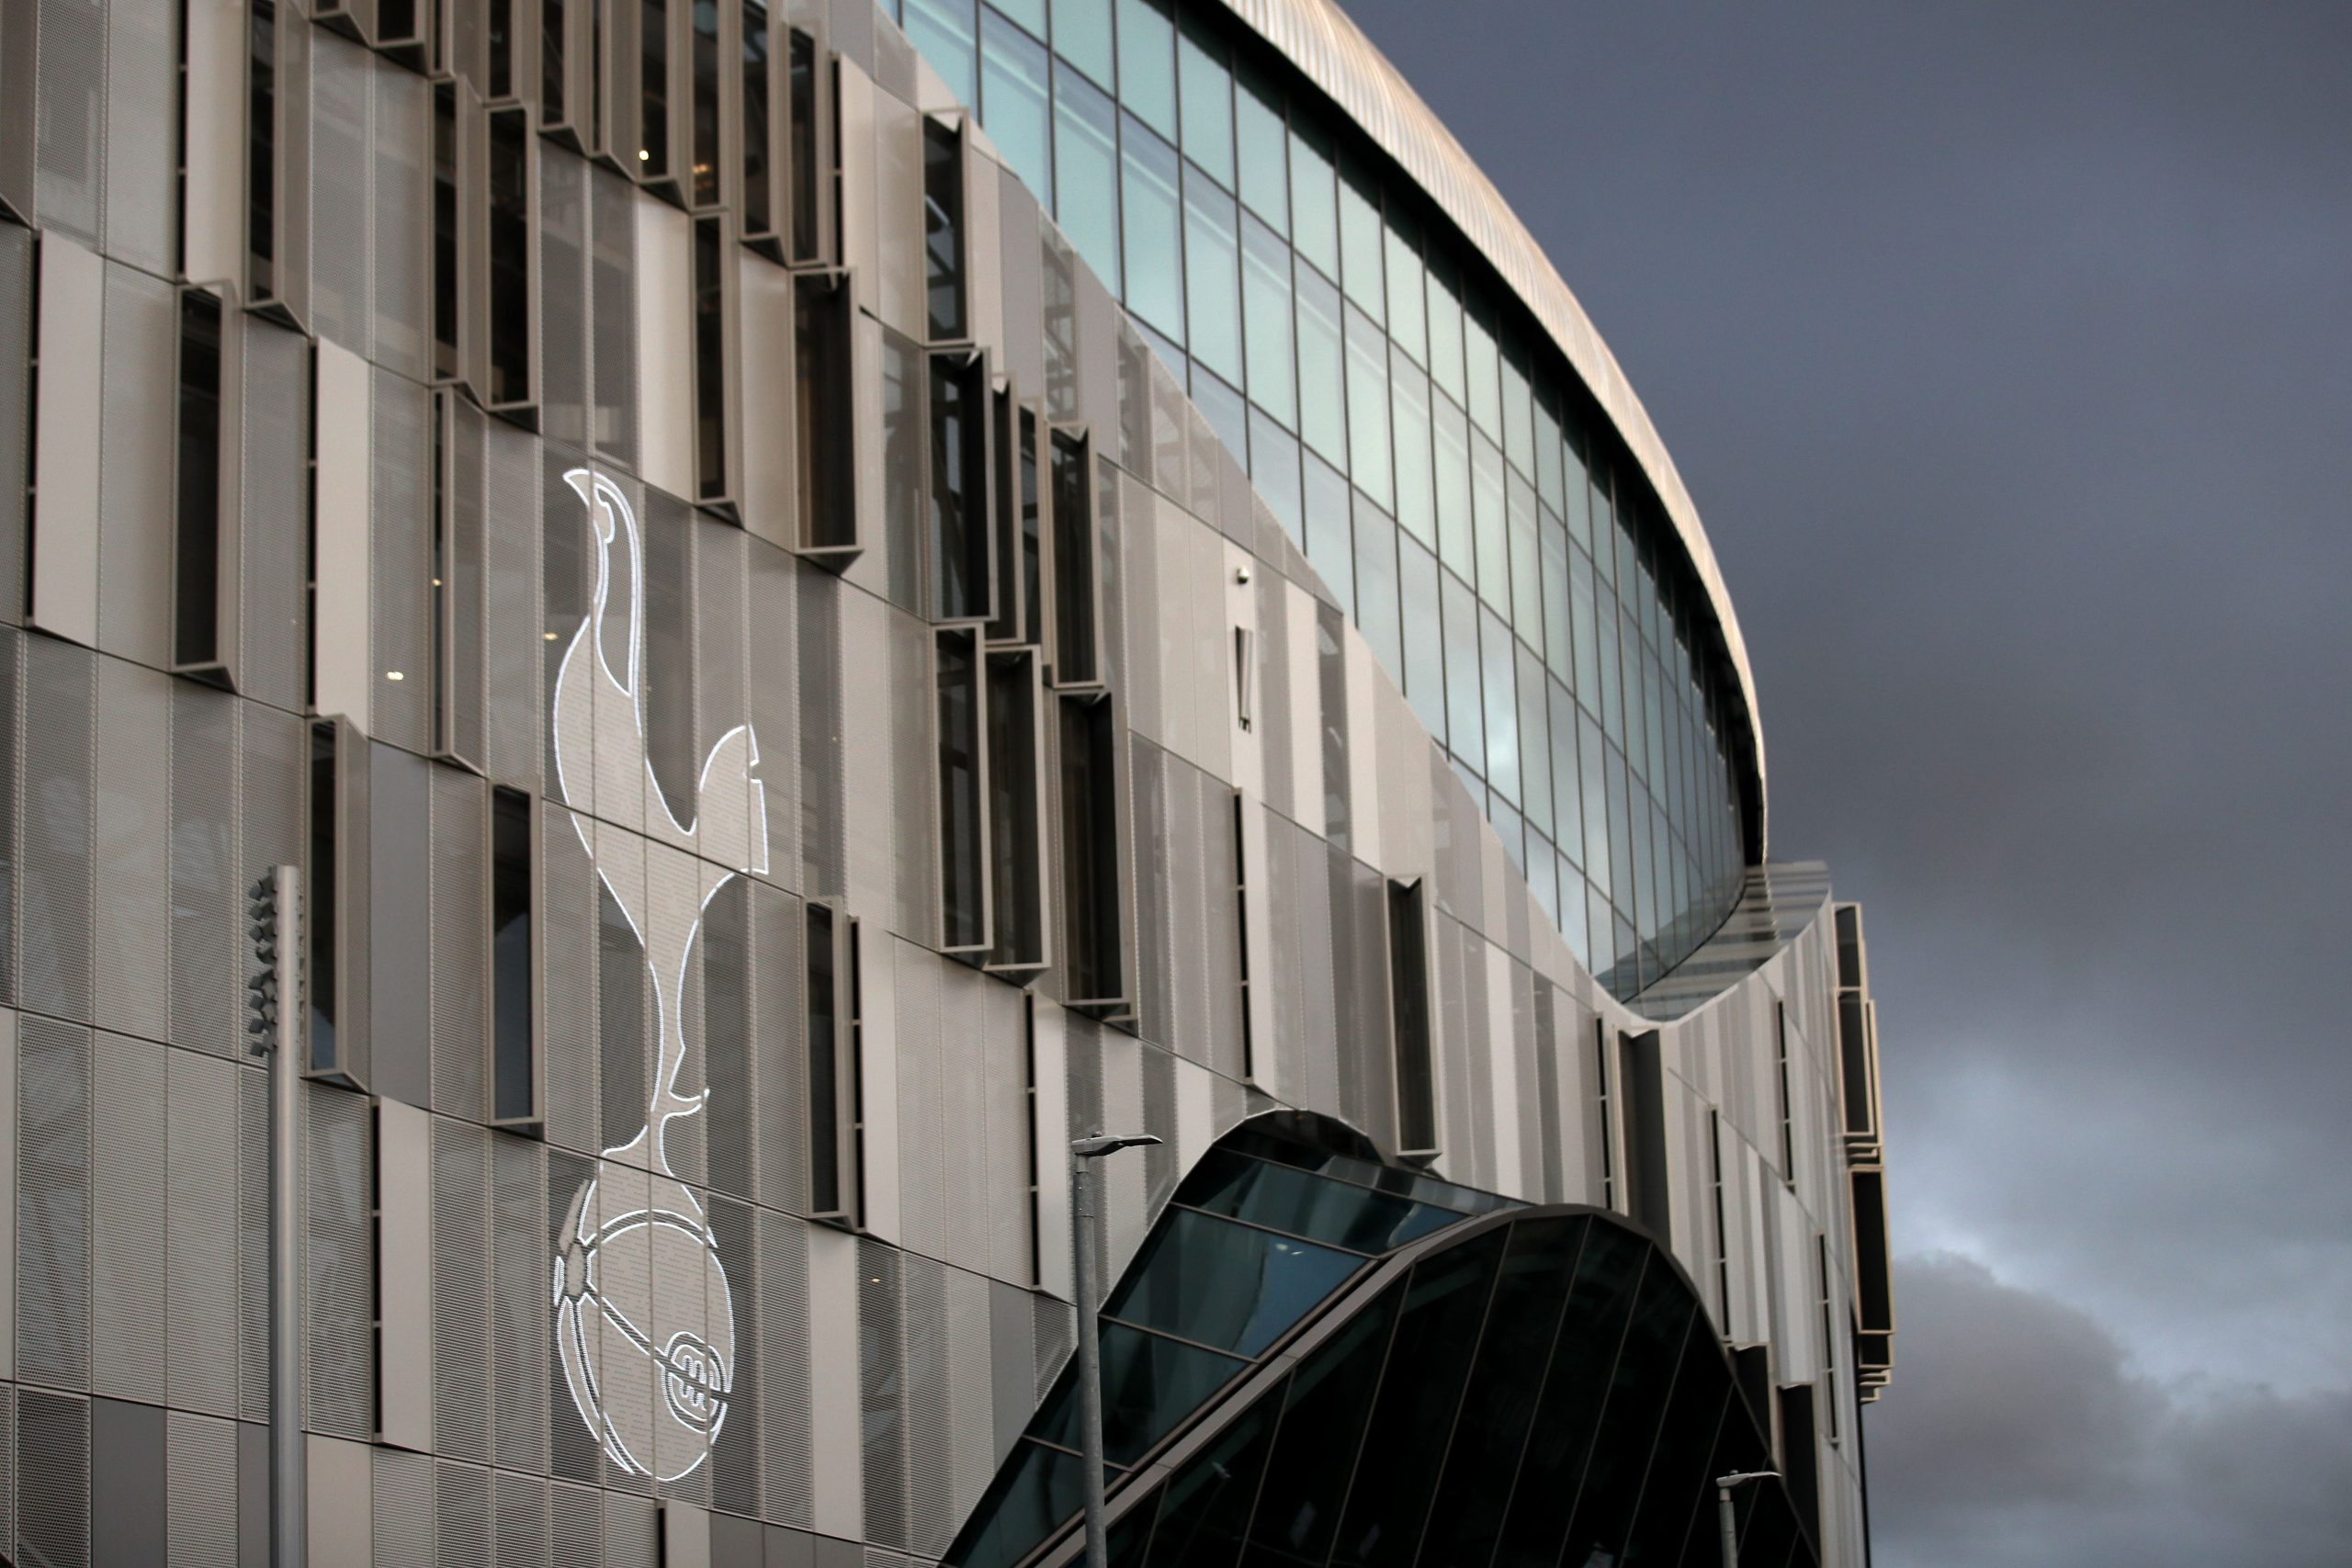 Tottenham Hotspur release statement after 3 players break Covid-19 rules at Christmas. (GETTY Images)